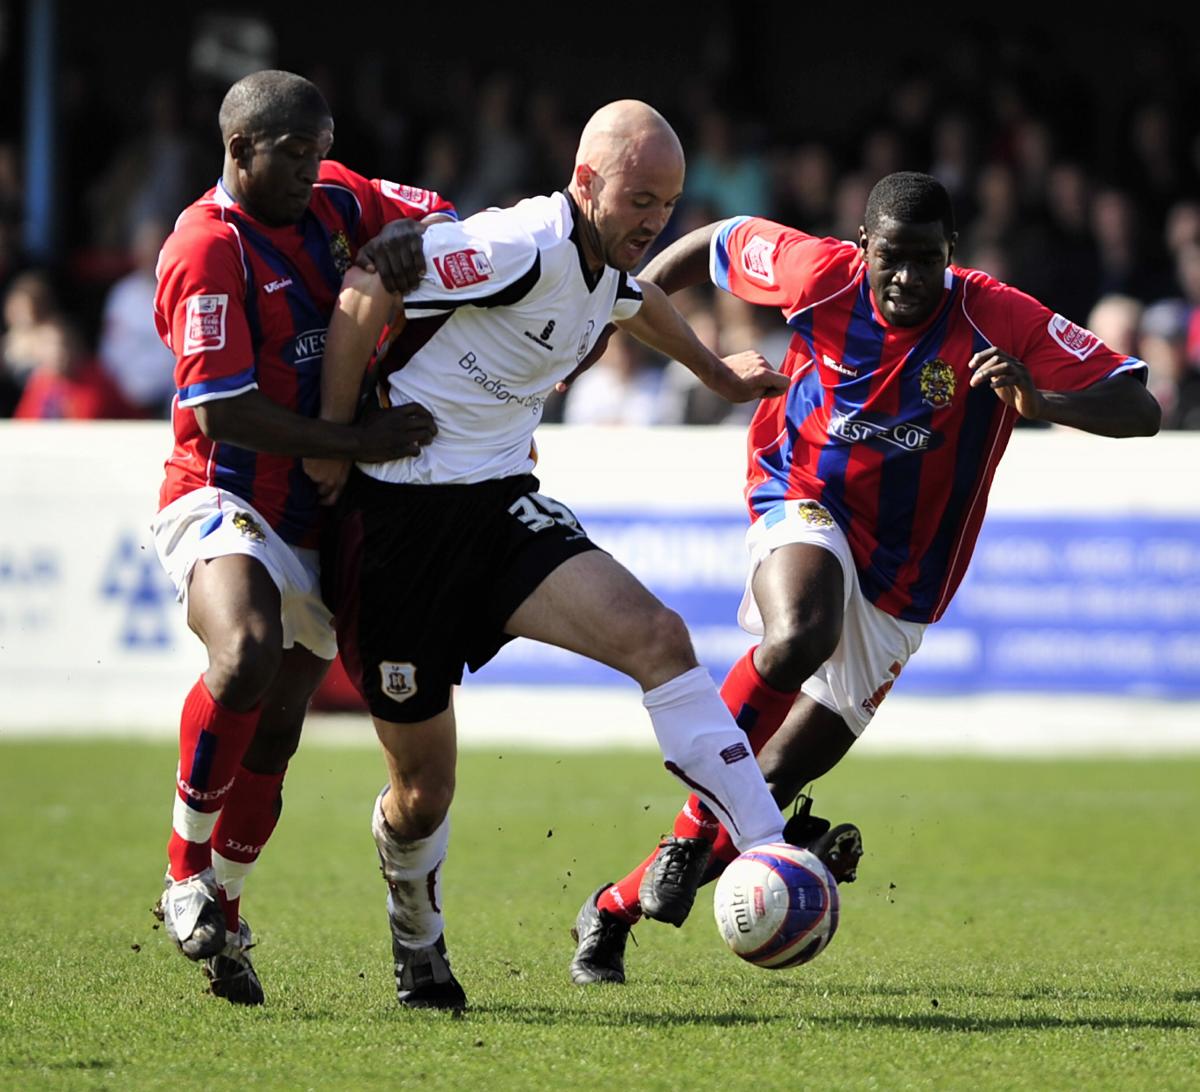 Match pictures from City's game against Dagenham